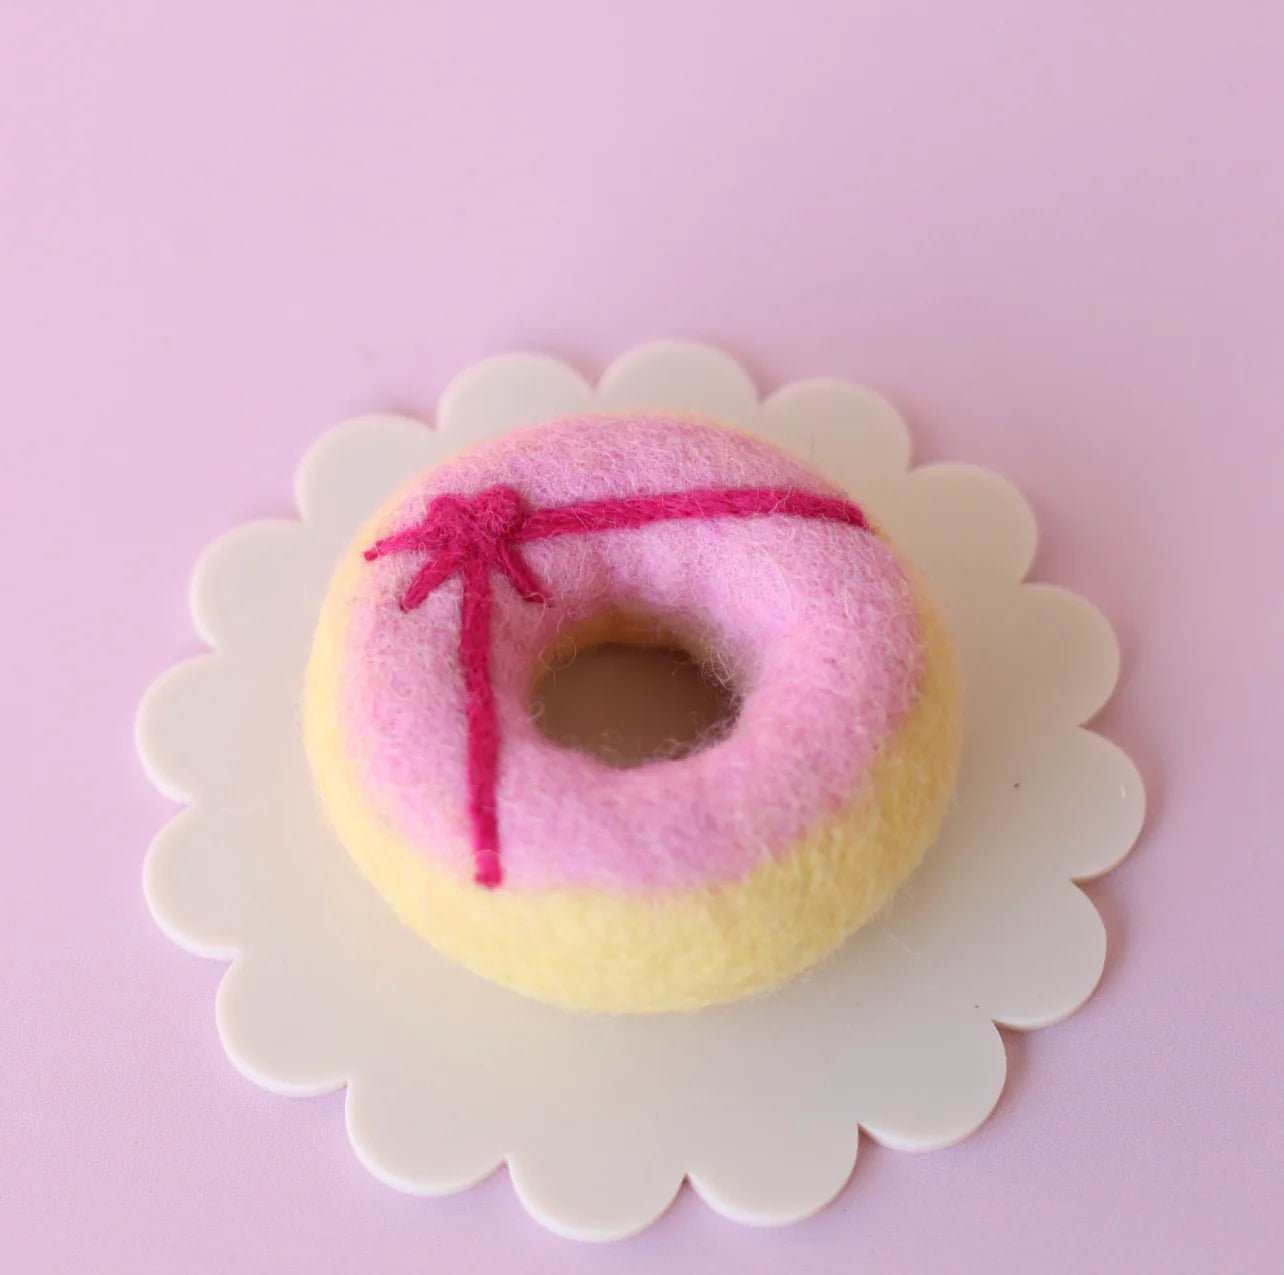 JUNI MOON | FESTIVE DONUT (MULTIPLE OPTIONS) Wrapped Up Pink by JUNI MOON - The Playful Collective